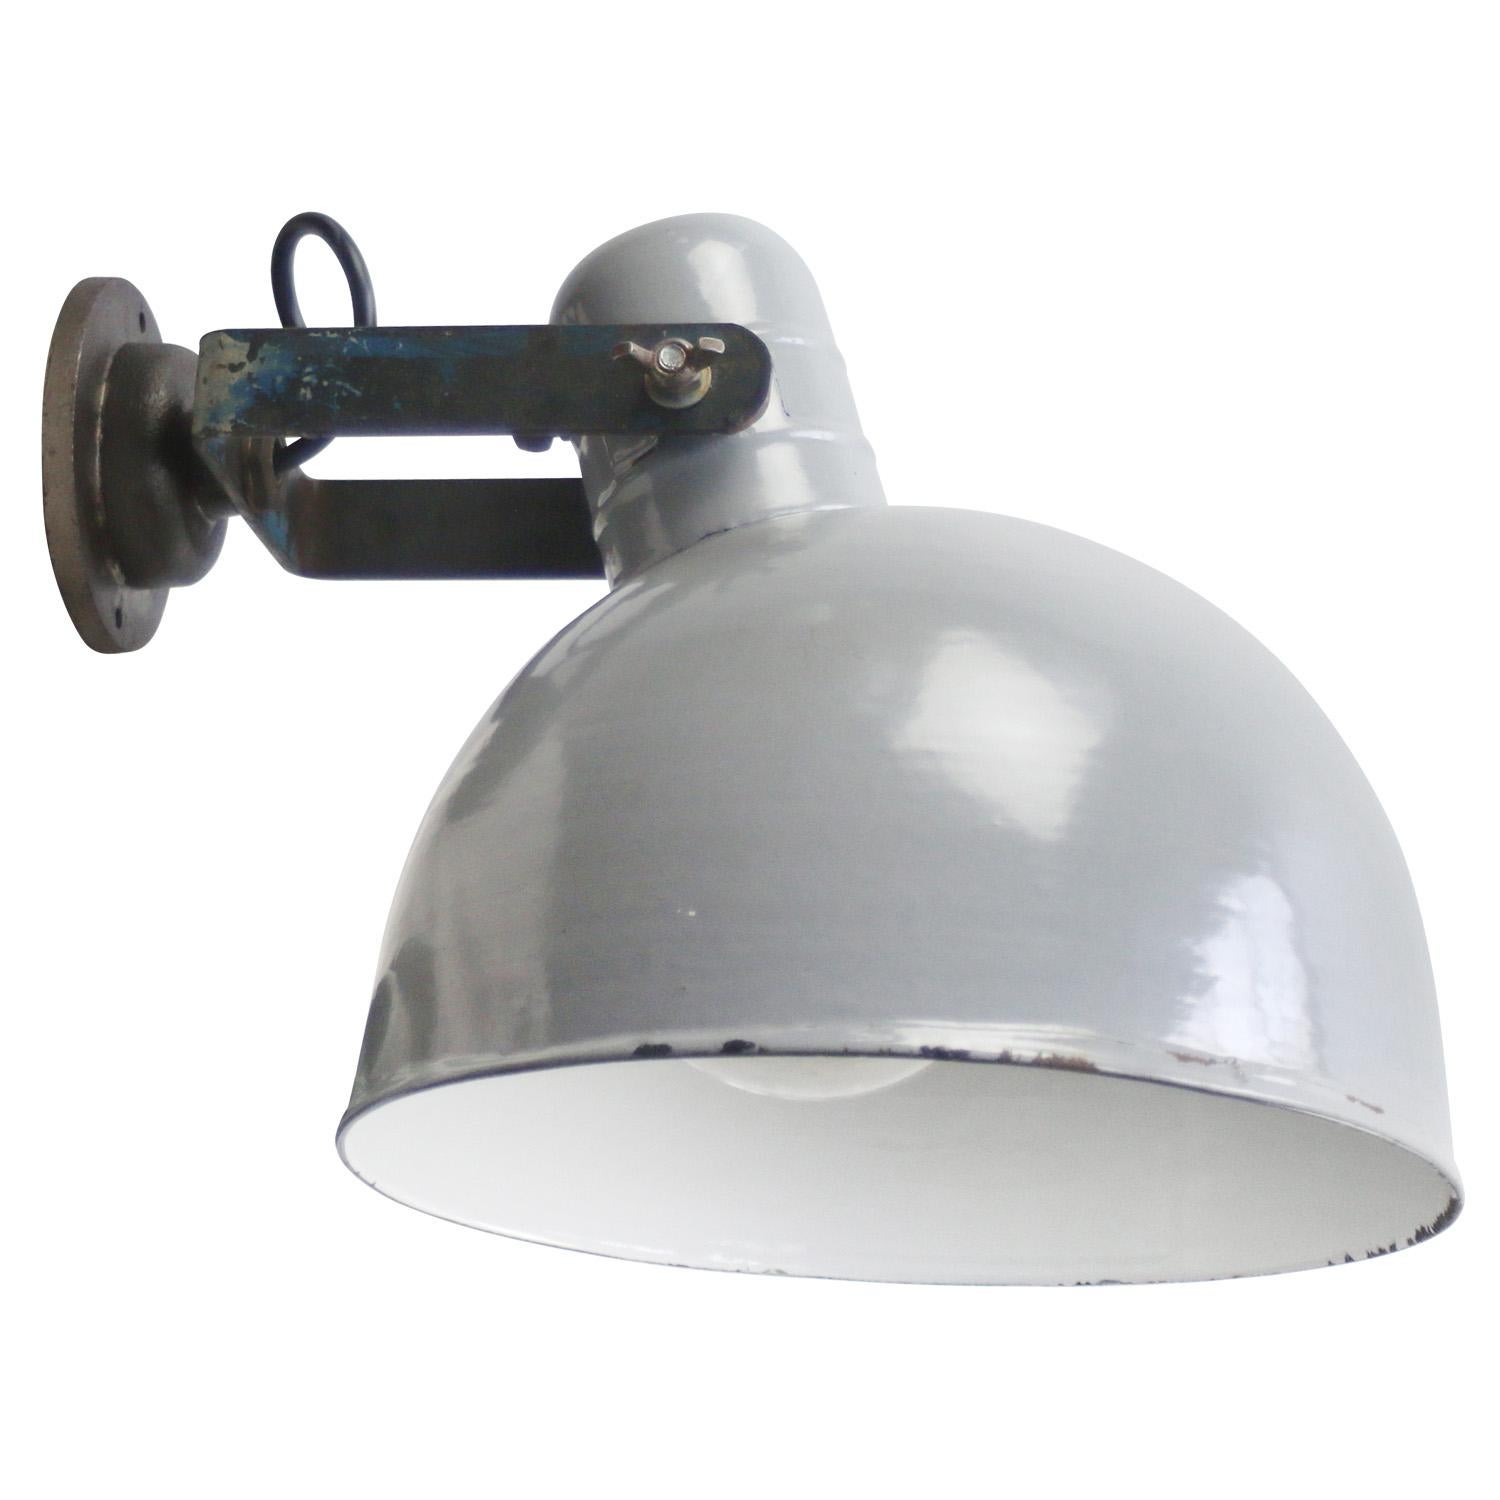 Belgian industrial wall lamp
Grey enamel, white inside
Cast iron arm

Diameter cast iron wall piece: 10.5 cm / 4”,
2 holes to secure

Weight: 2.60 kg / 5.7 lb

Priced per individual item. All lamps have been made suitable by international standards